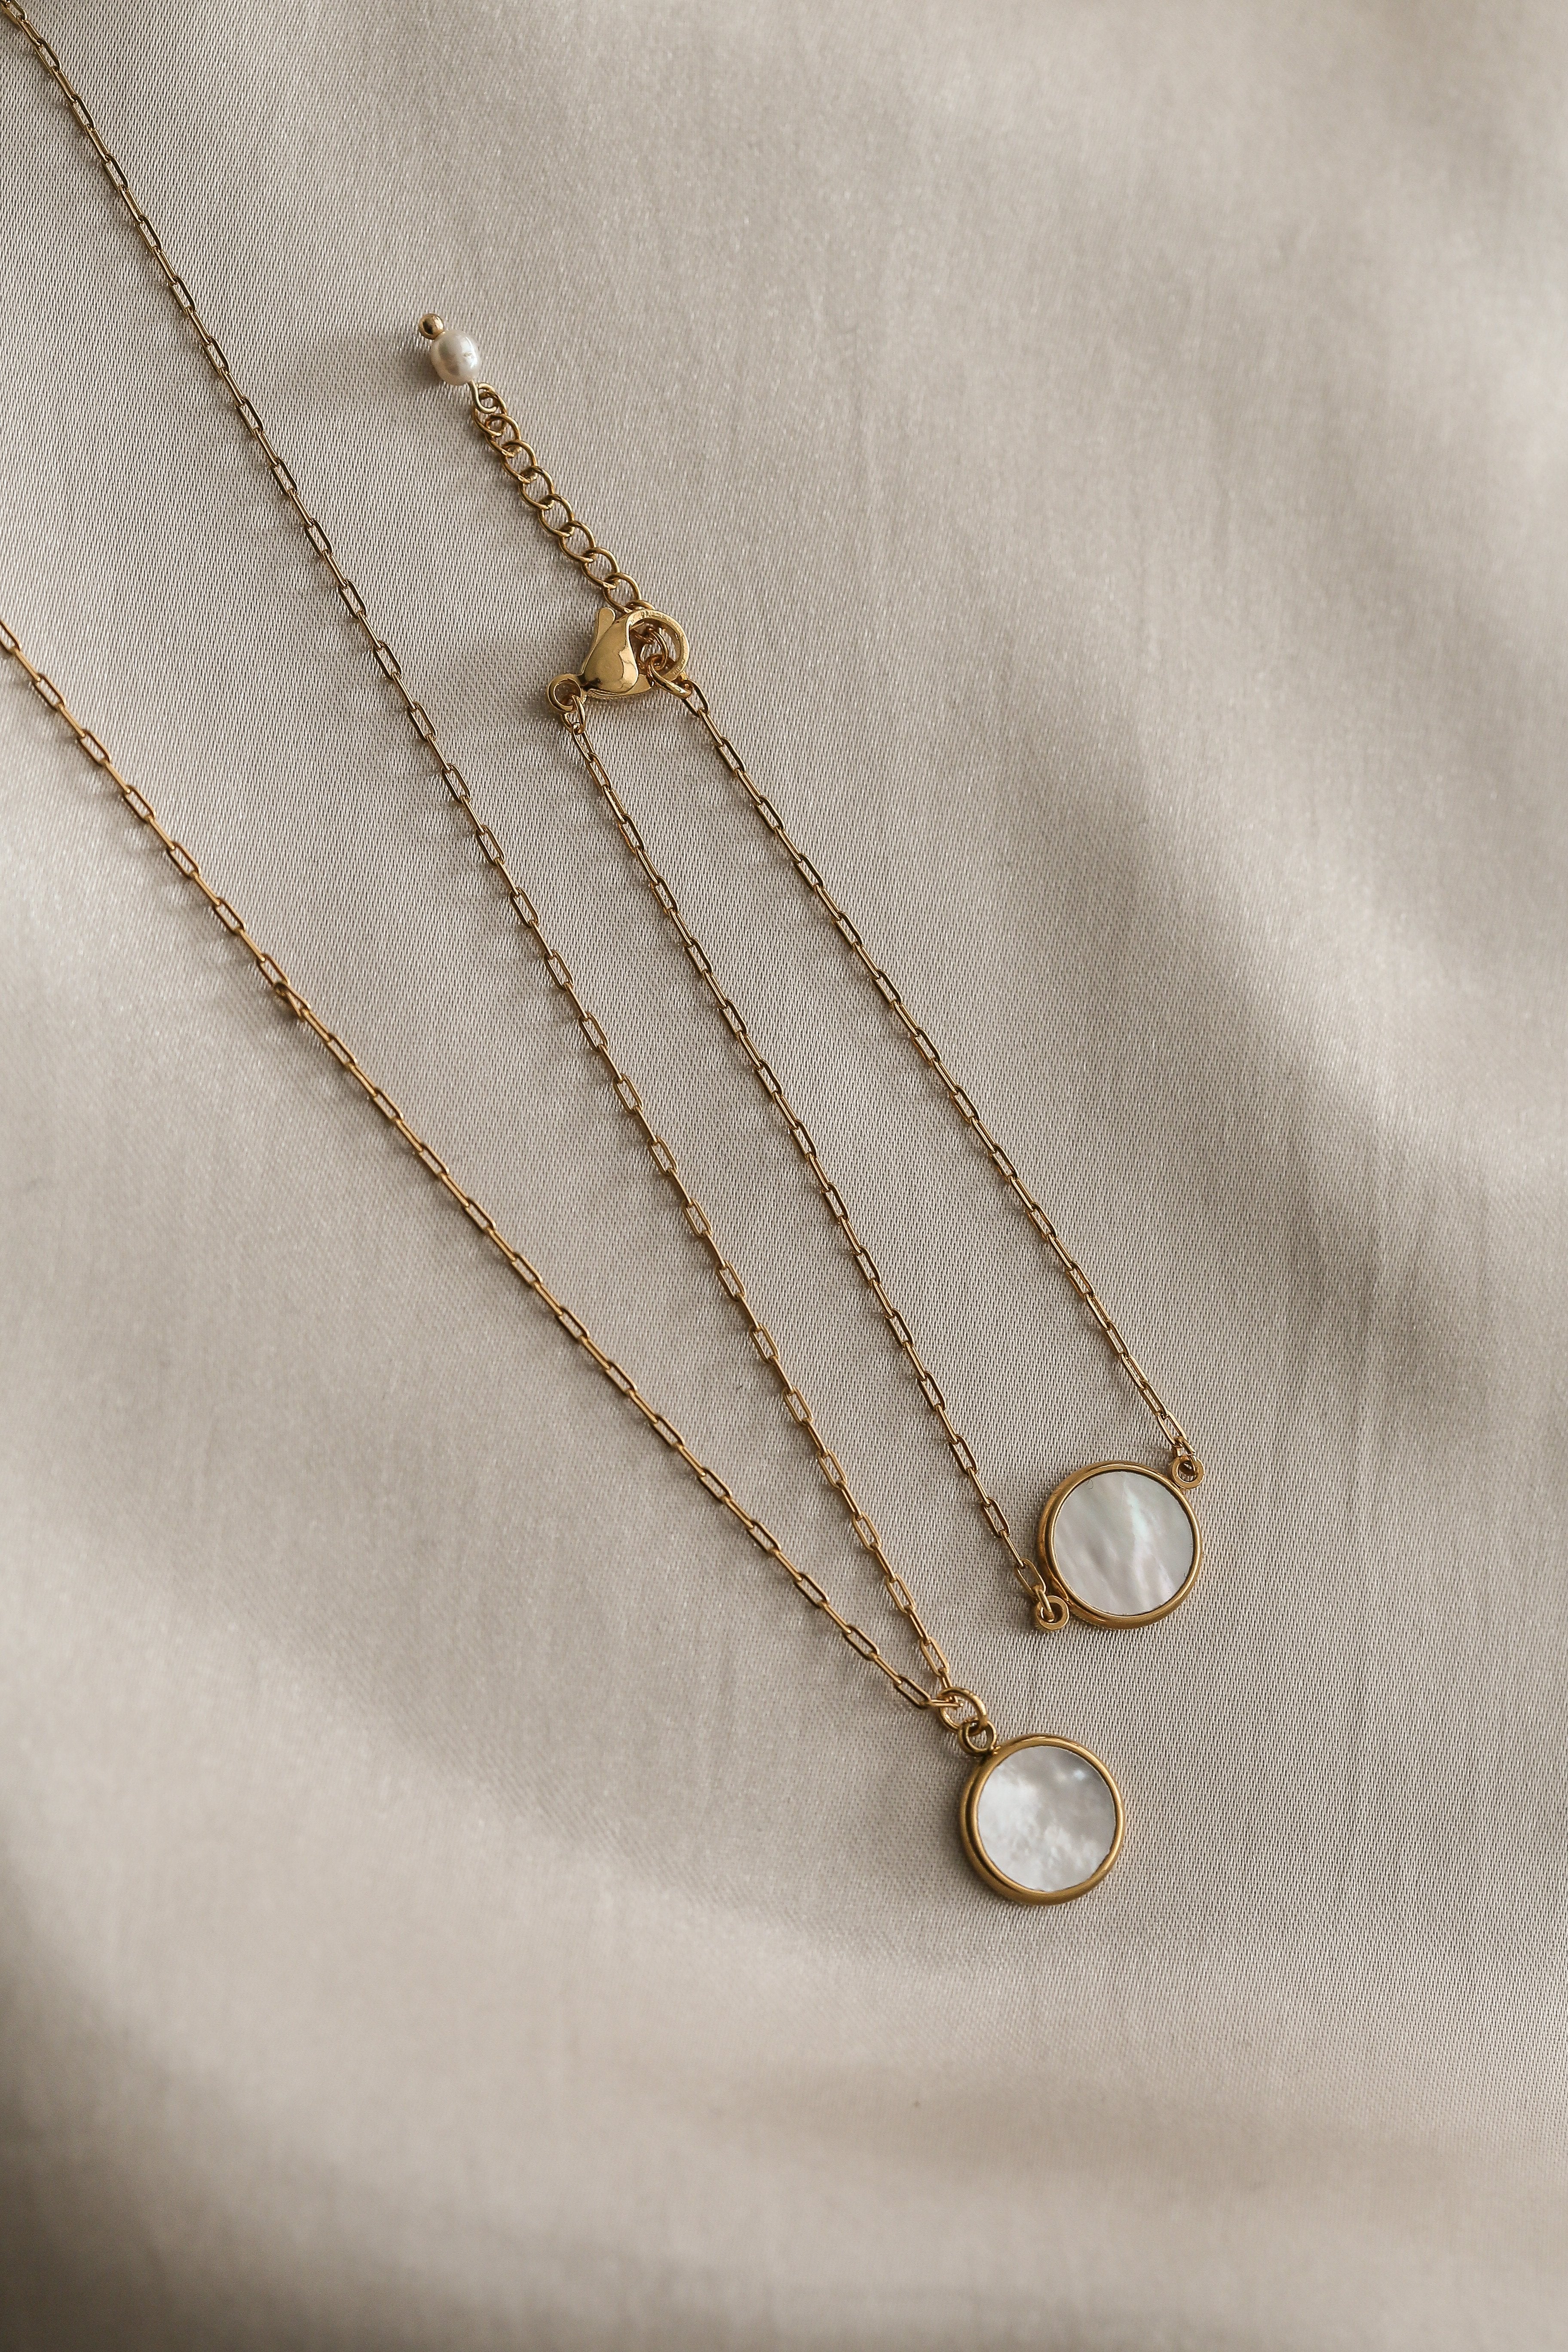 Caylee Necklace - Boutique Minimaliste has waterproof, durable, elegant and vintage inspired jewelry